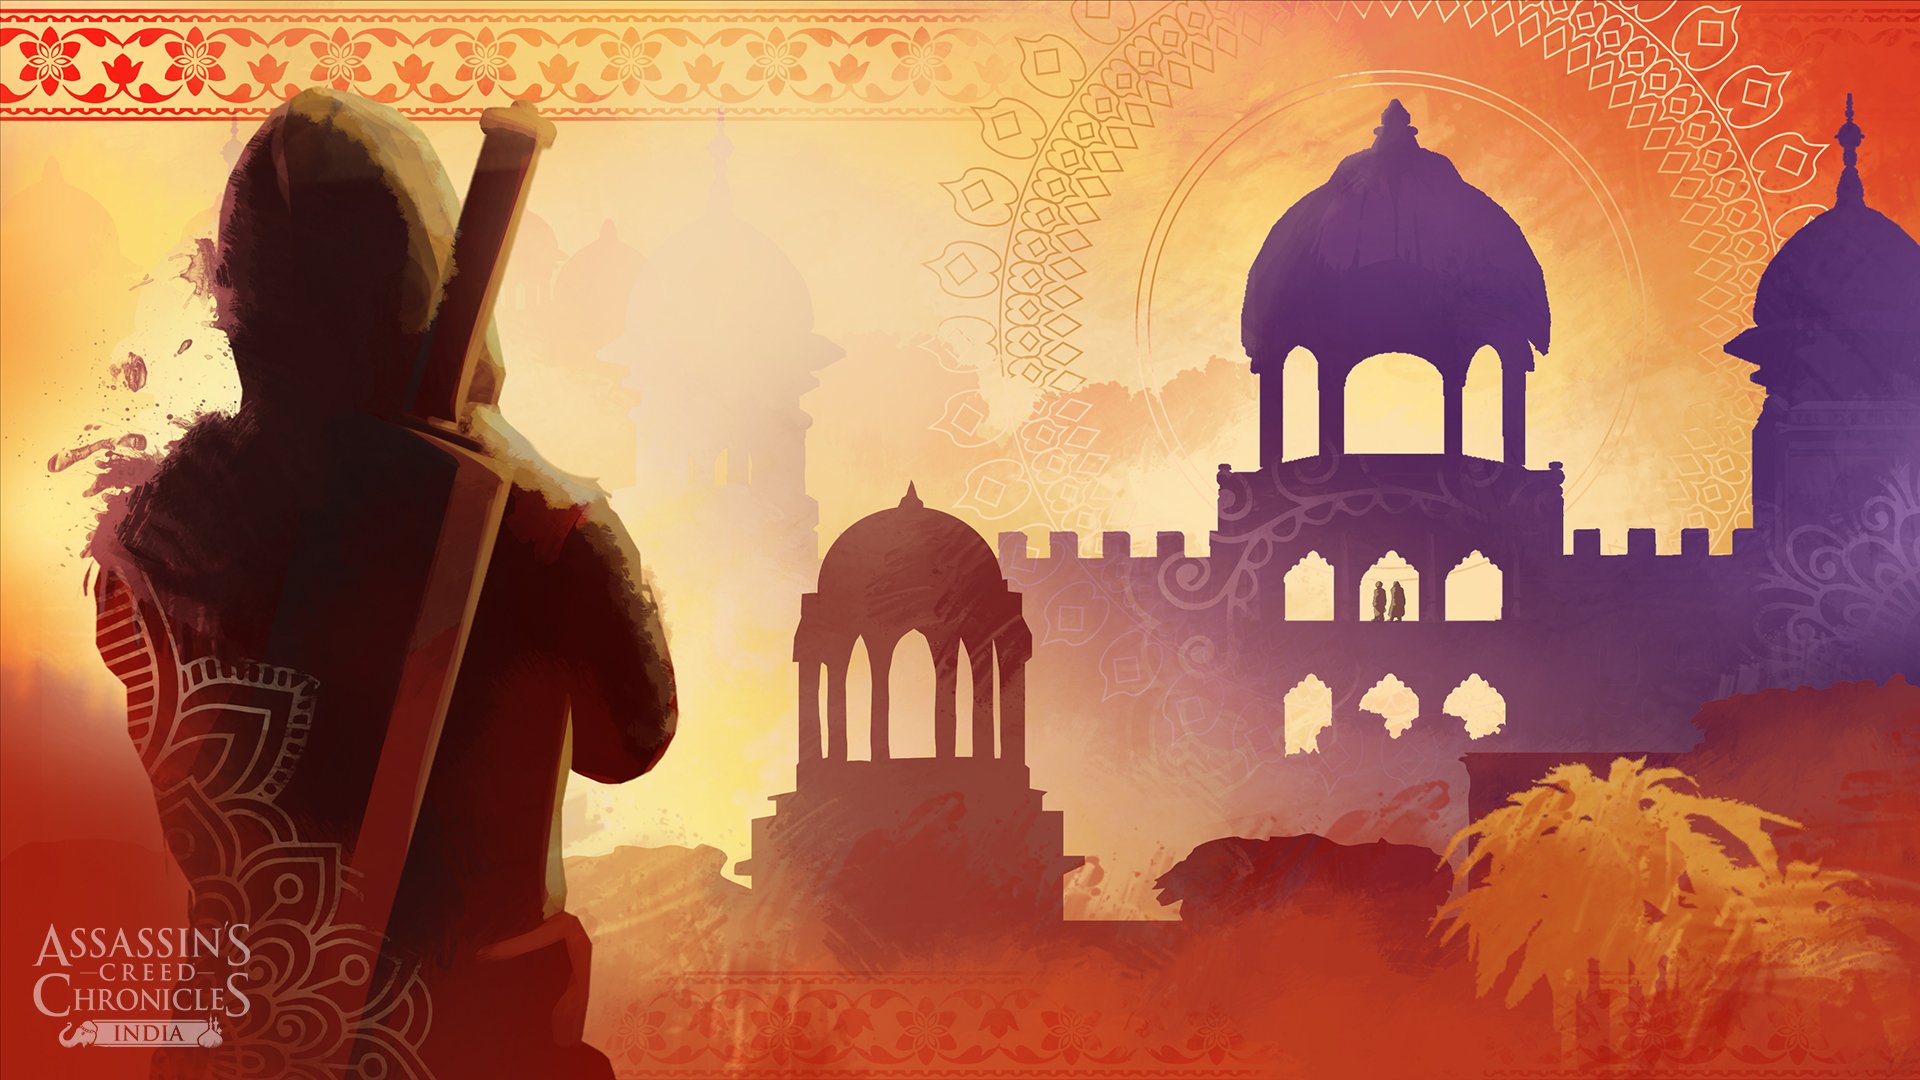 video game, assassin's creed chronicles: india, assassin's creed chronicles, assassin's creed